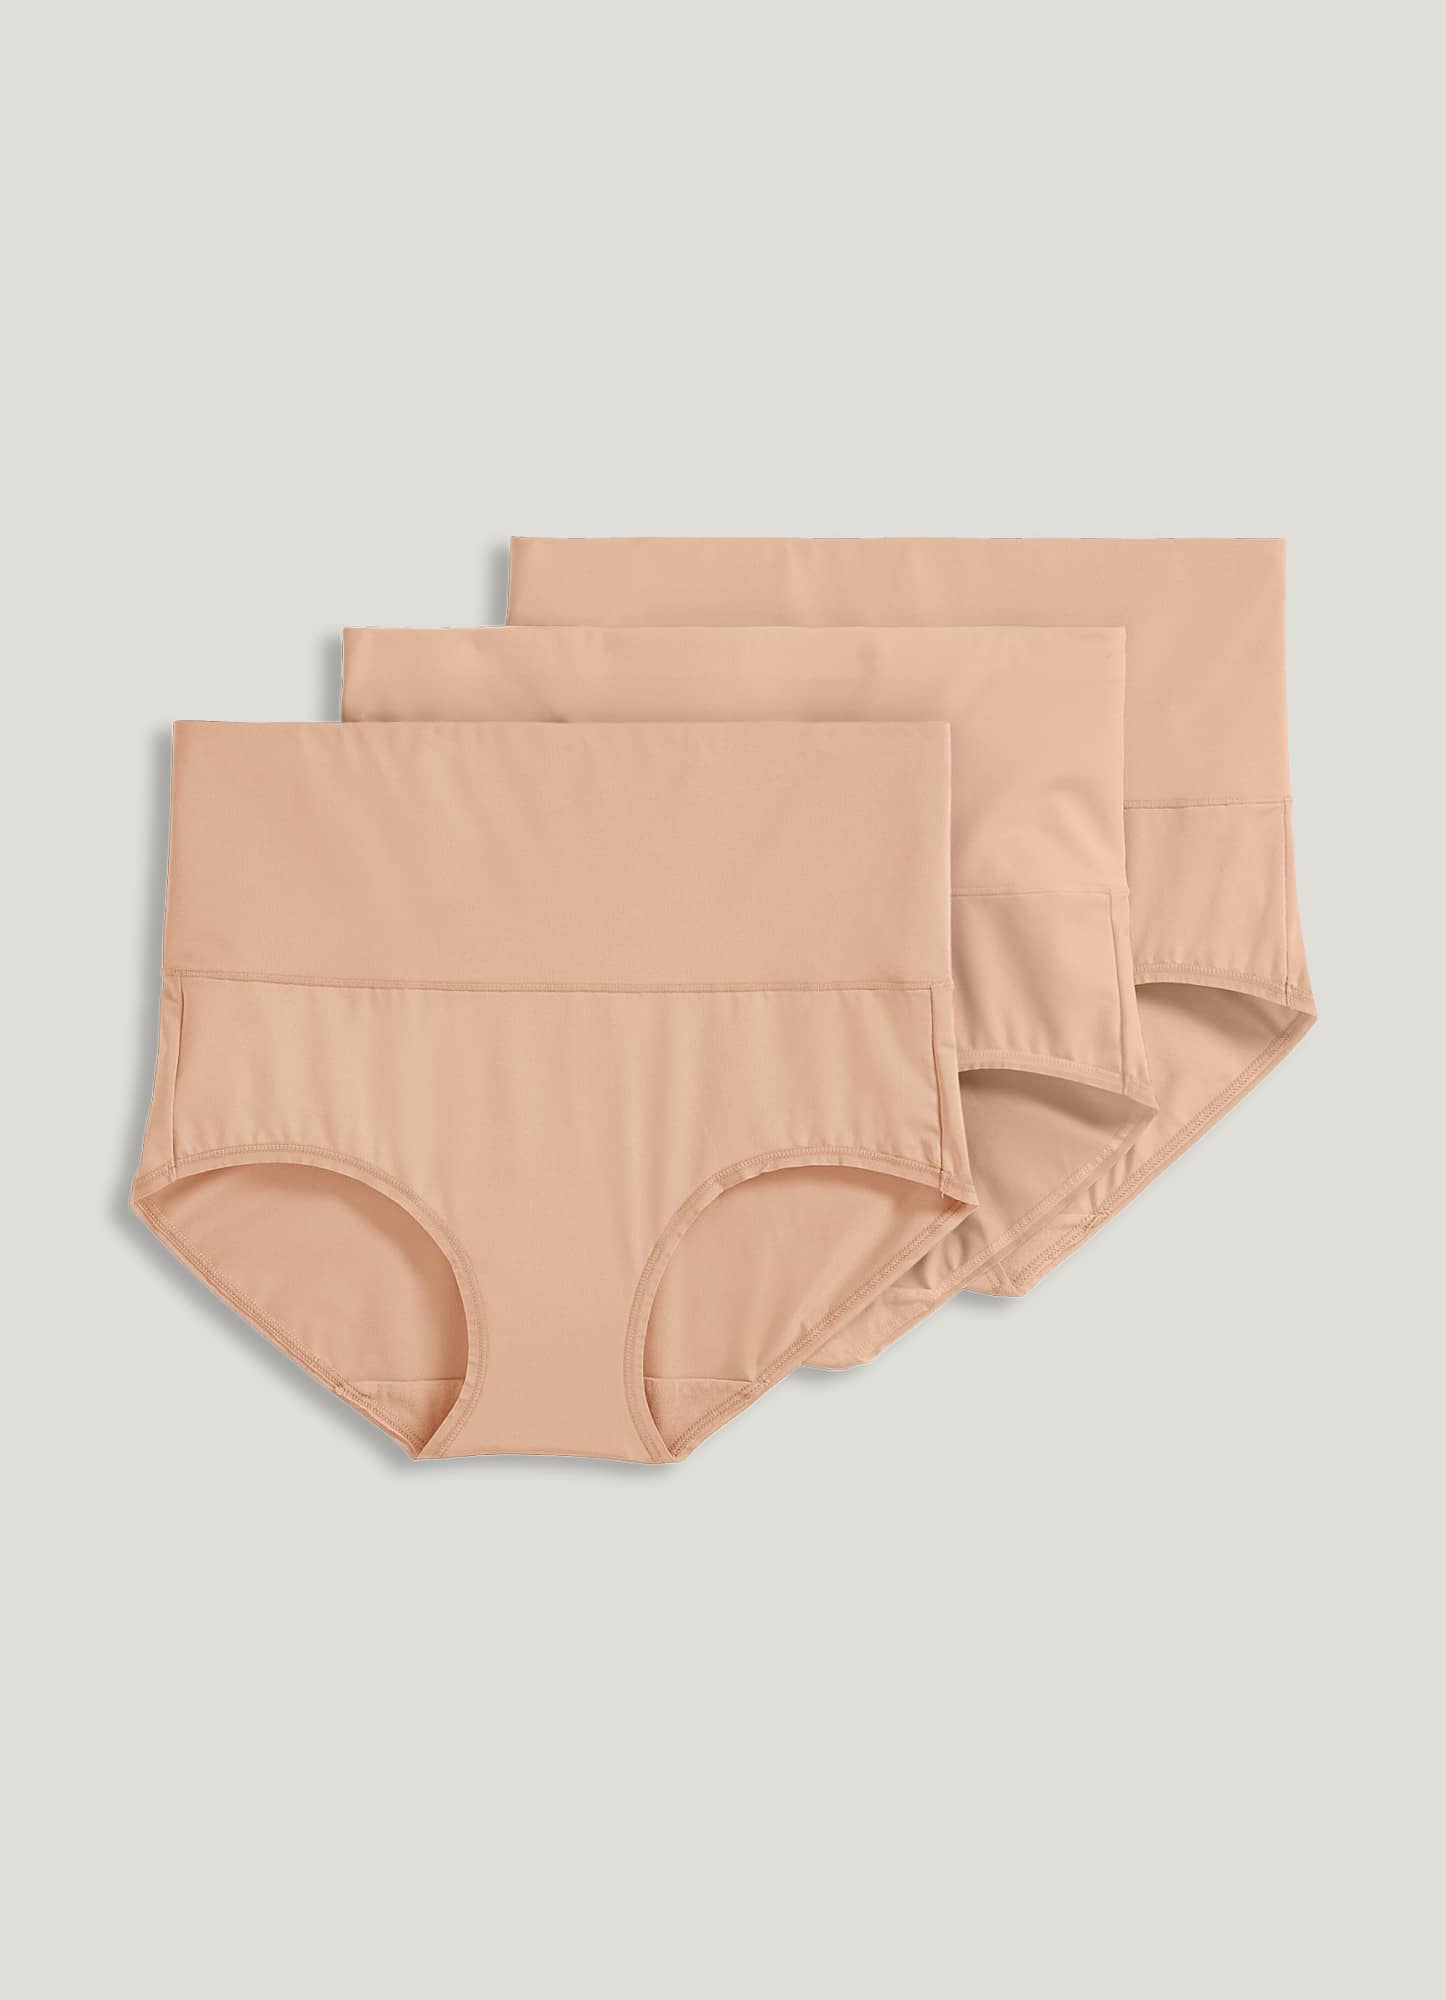  Everyday Shaping Panties Brief, Naked 4.0, 3X